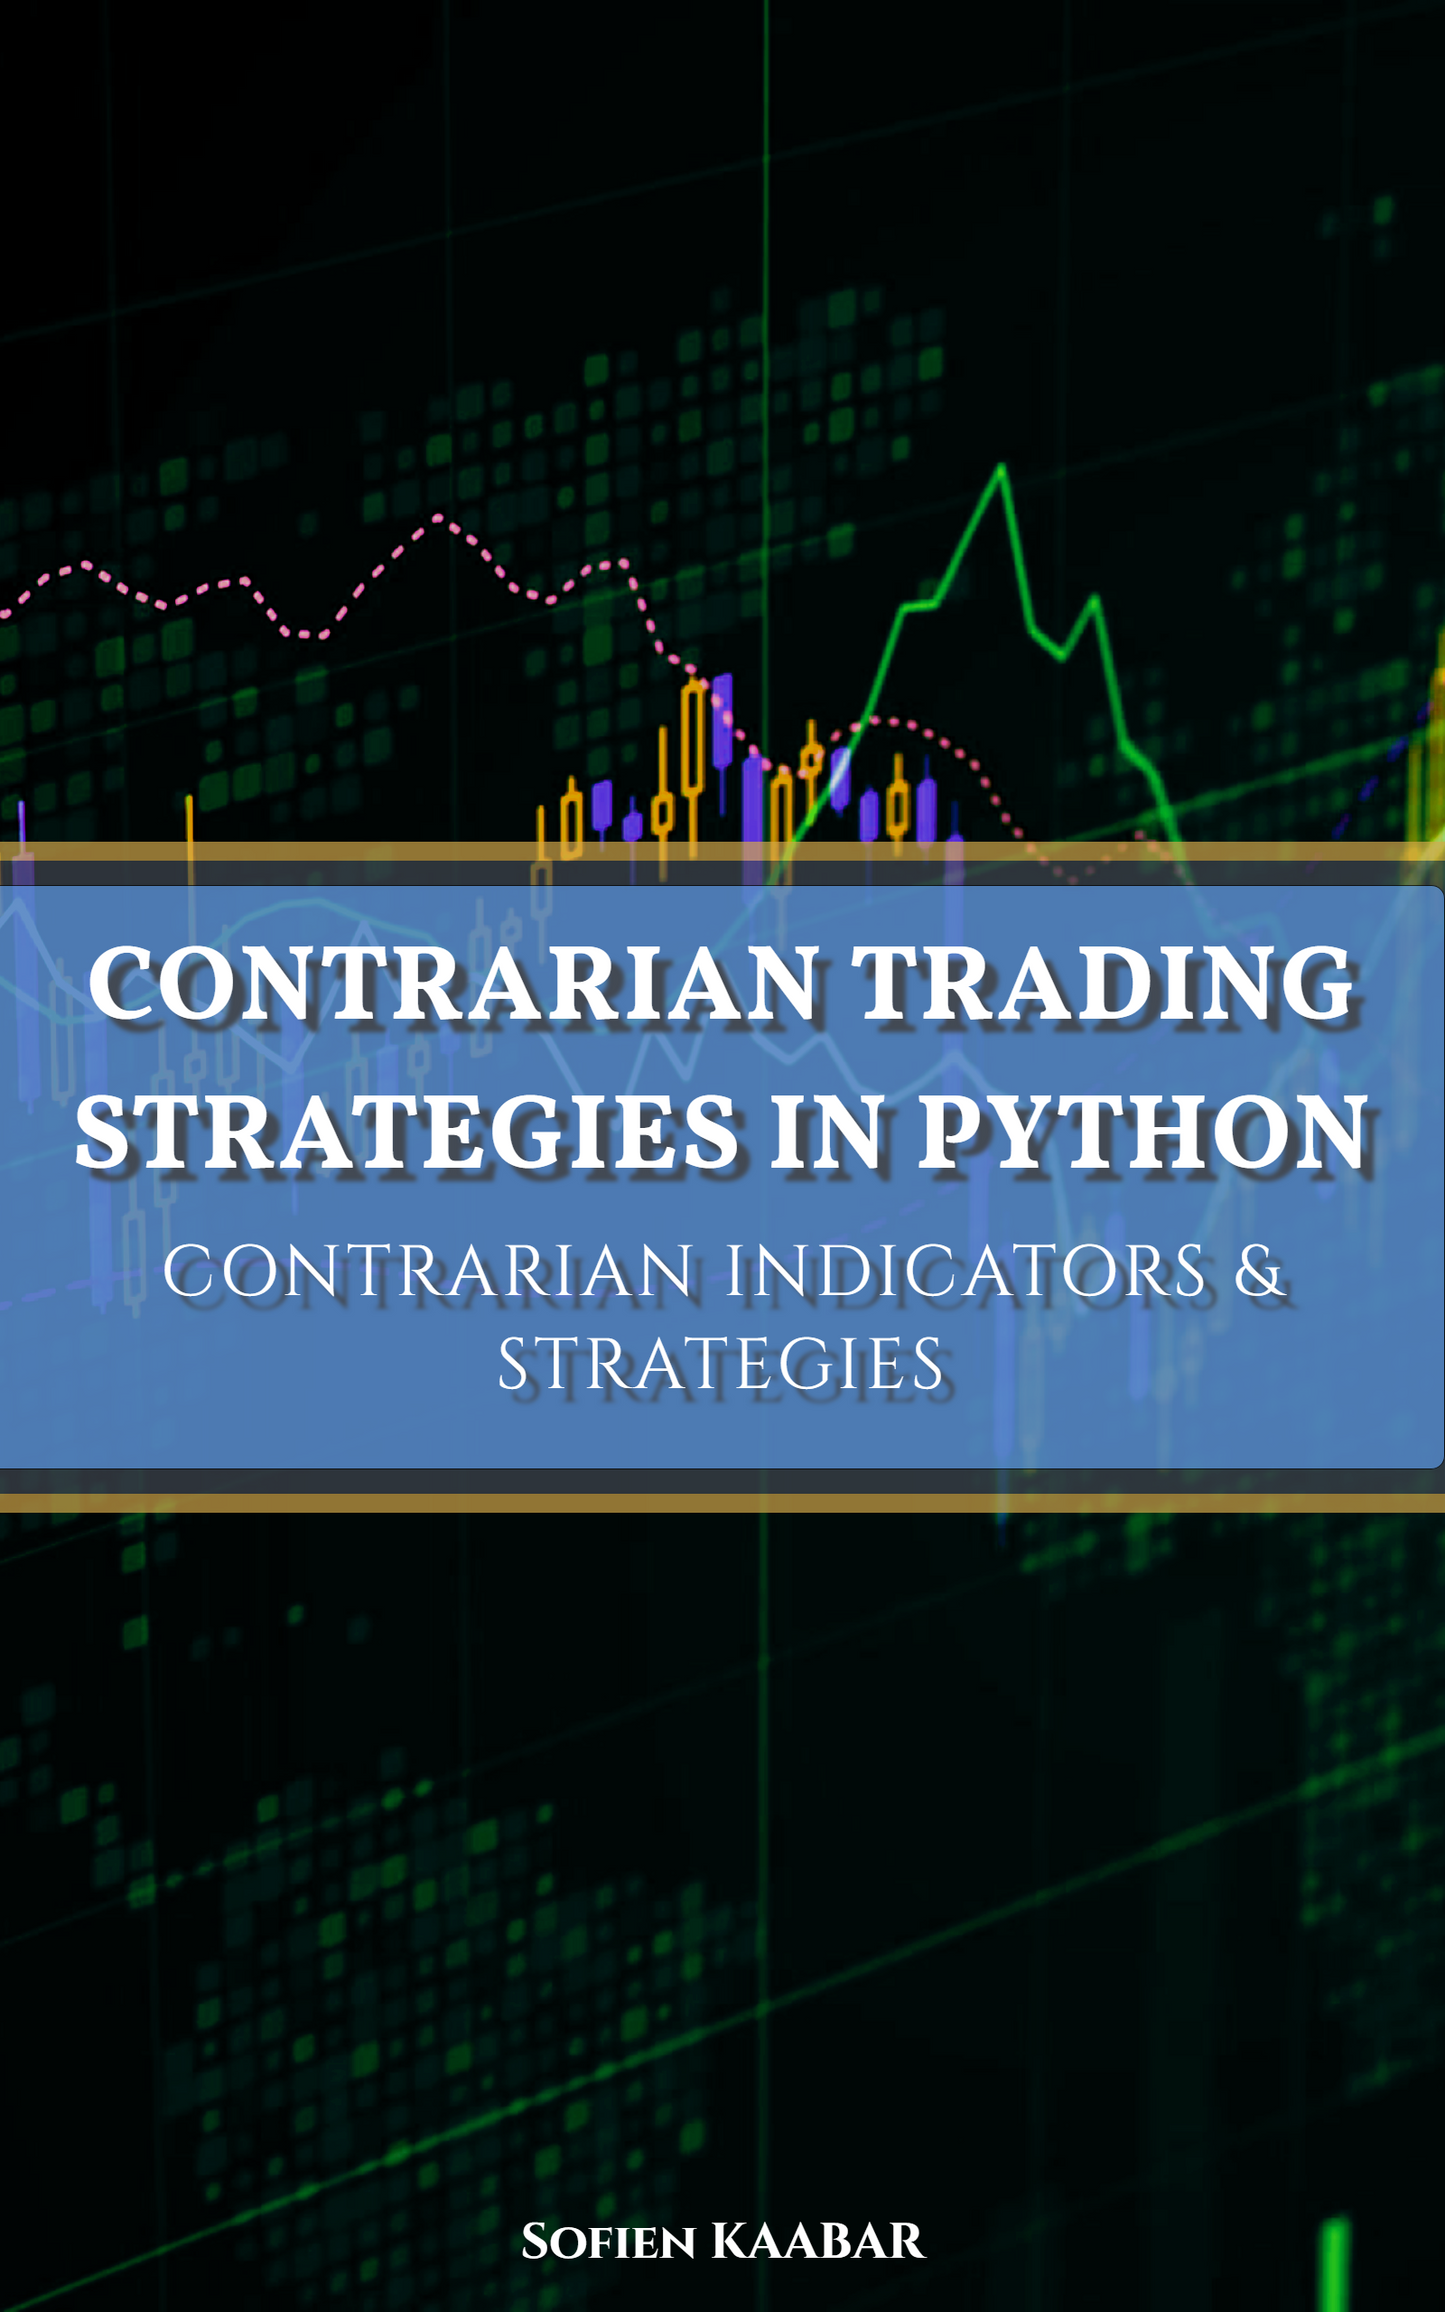 Contrarian Trading Strategies in Python [PDF]